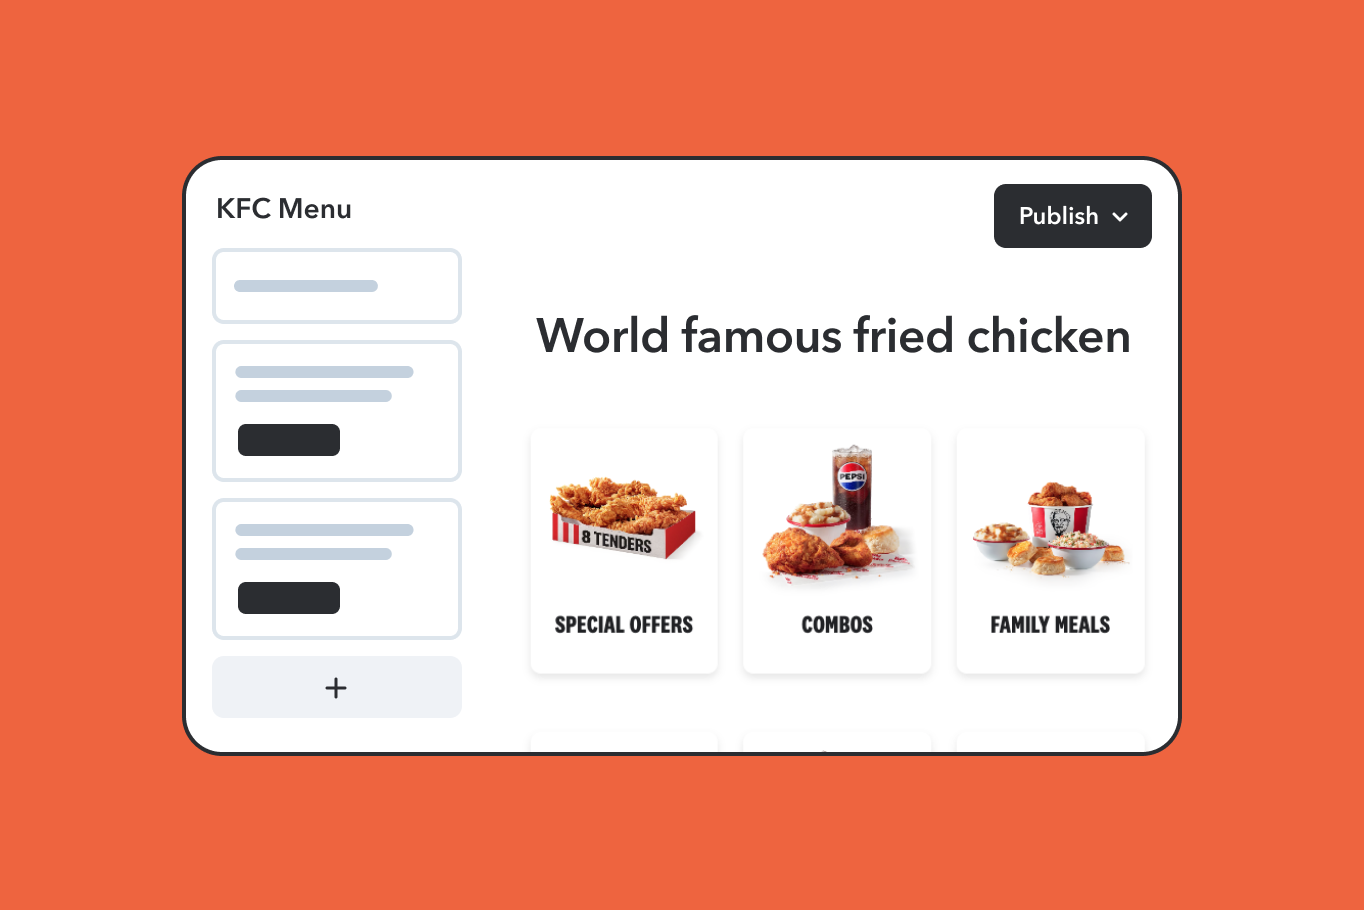 Contentful brings brand consistency to KFC’s web and mobile apps, turning up the heat on brand recognition and customer loyalty.